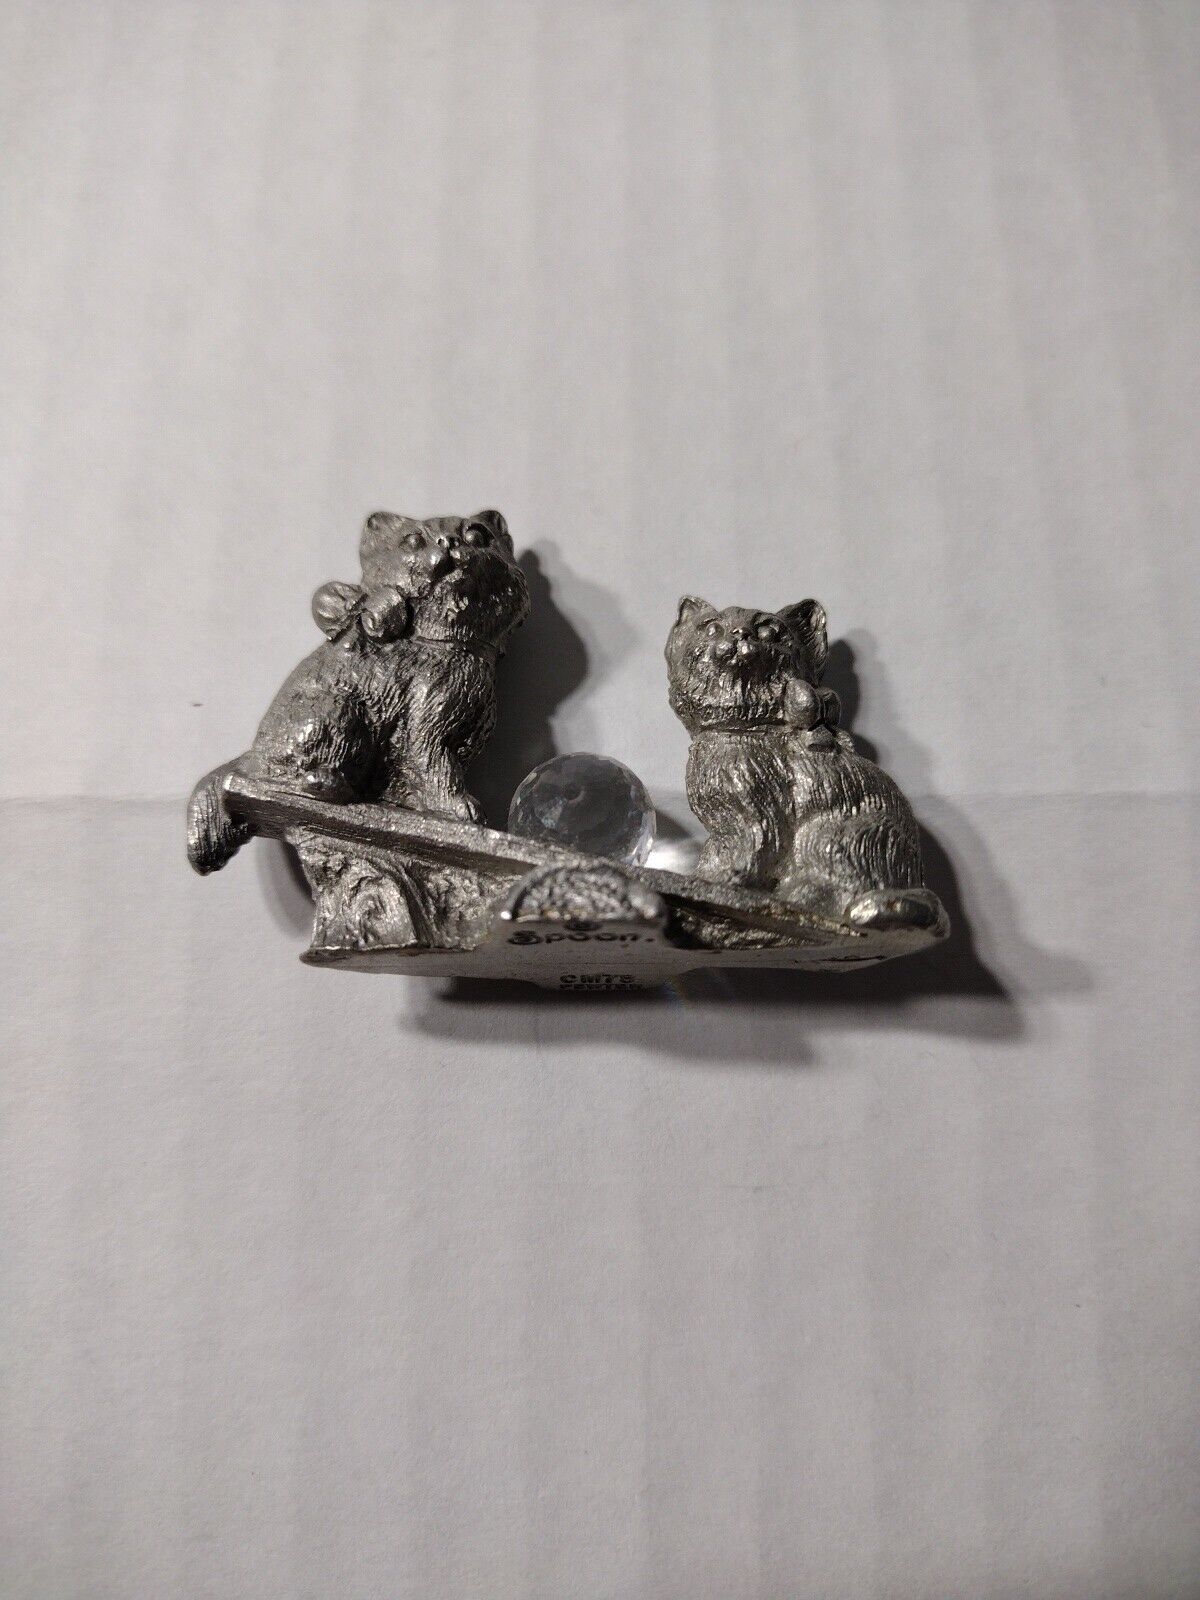 Vintage Spoontiques Cm #78 Pewter Figurine 2 cats kittens on The Swing 2 x 1.5